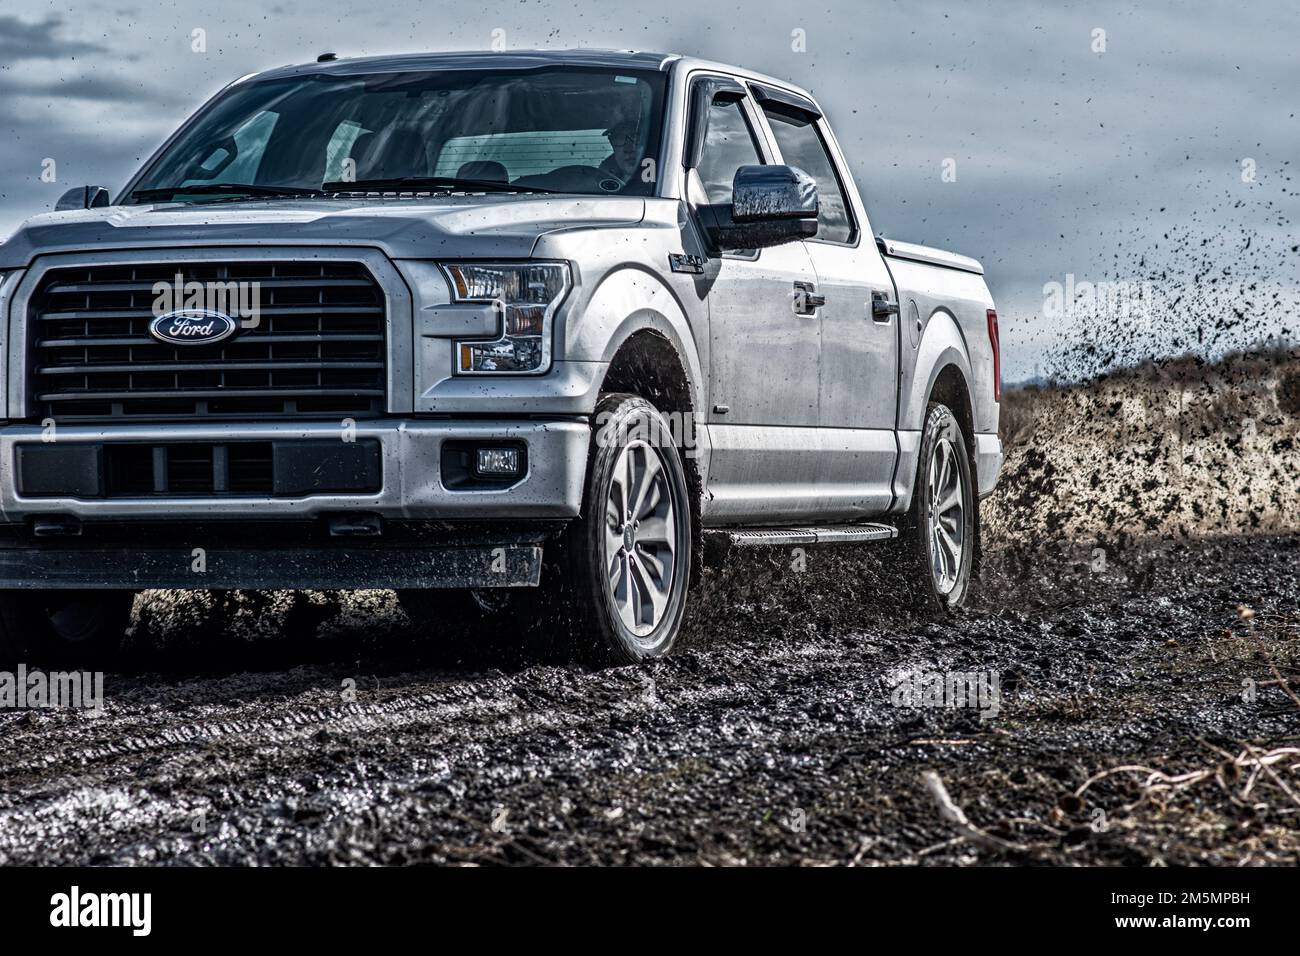 The Ford F150 Silver Truck Car 4x4 SUV driving in the mud Stock Photo